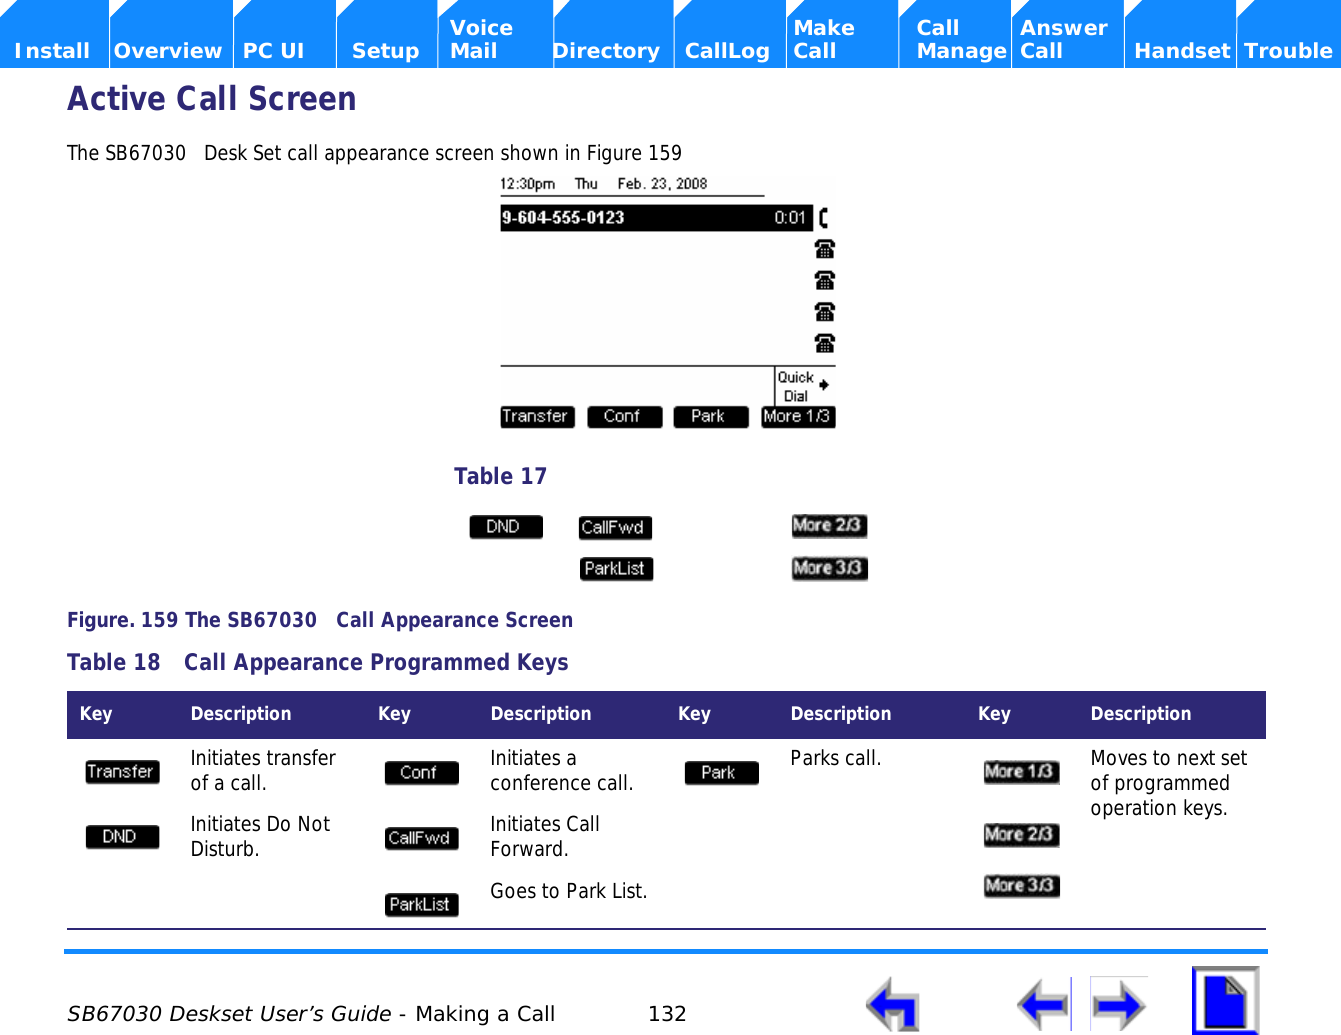  SB67030 Deskset User’s Guide - Making a Call 132    Voice Make Call Answer  Install Overview PC UI Setup Mail Directory CallLog Call Manage Call Handset TroubleActive Call ScreenThe SB67030   Desk Set call appearance screen shown in Figure 159Figure. 159 The SB67030   Call Appearance ScreenTable 18  Call Appearance Programmed KeysKey  Description Key  Description Key  Description Key  DescriptionInitiates transfer of a call. Initiates a conference call. Parks call. Moves to next set of programmed operation keys. Initiates Do Not Disturb. Initiates Call Forward.Goes to Park List.Table 17 